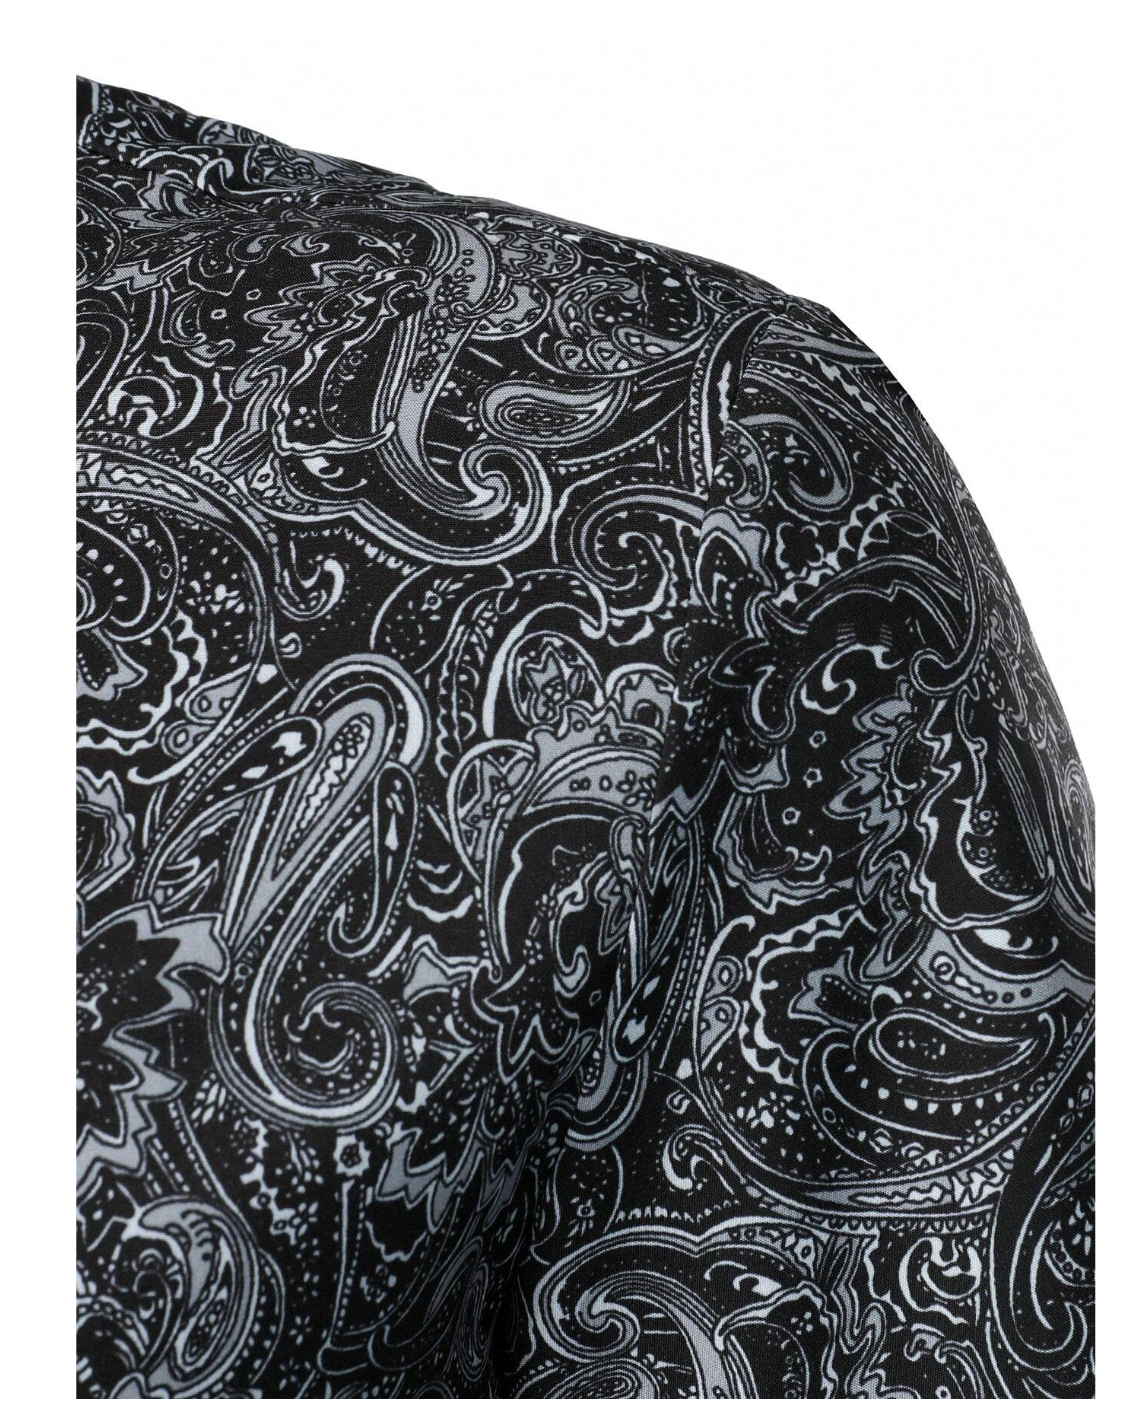 Paisley Elegance: Elevate Your Style with Manfinity Homme Men's Distinctive Print Shirt.